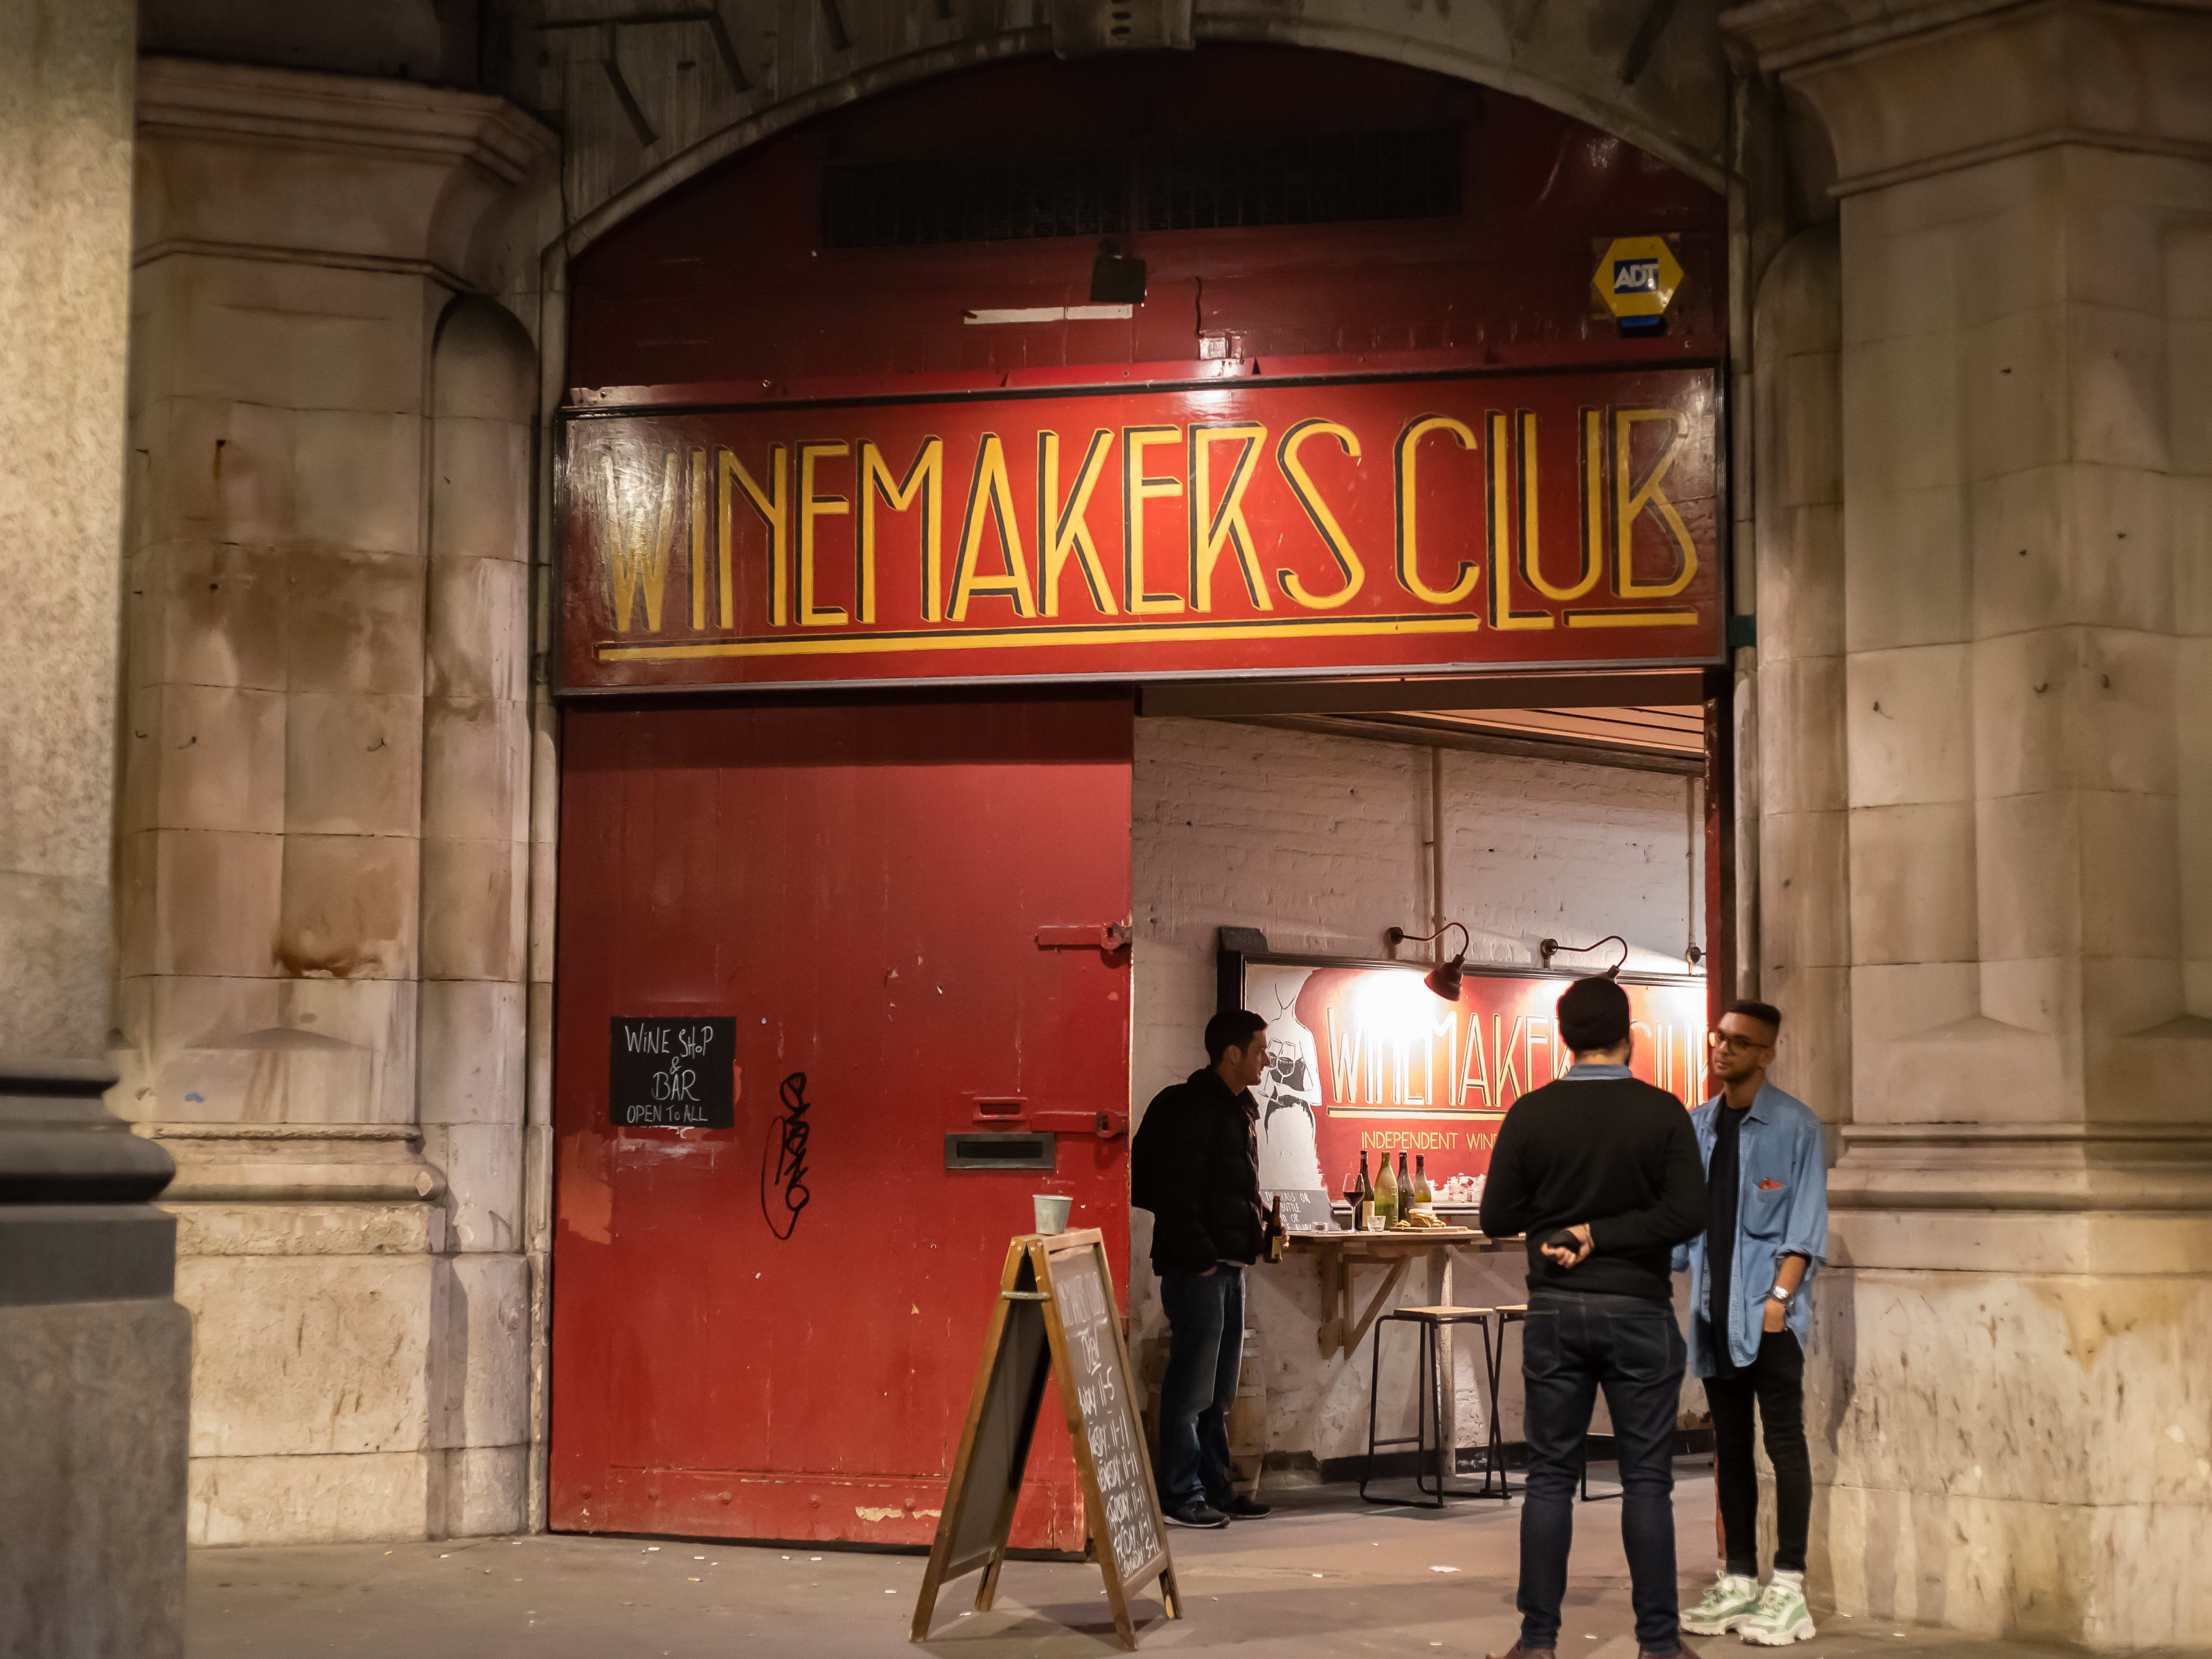 The Winemakers Club image